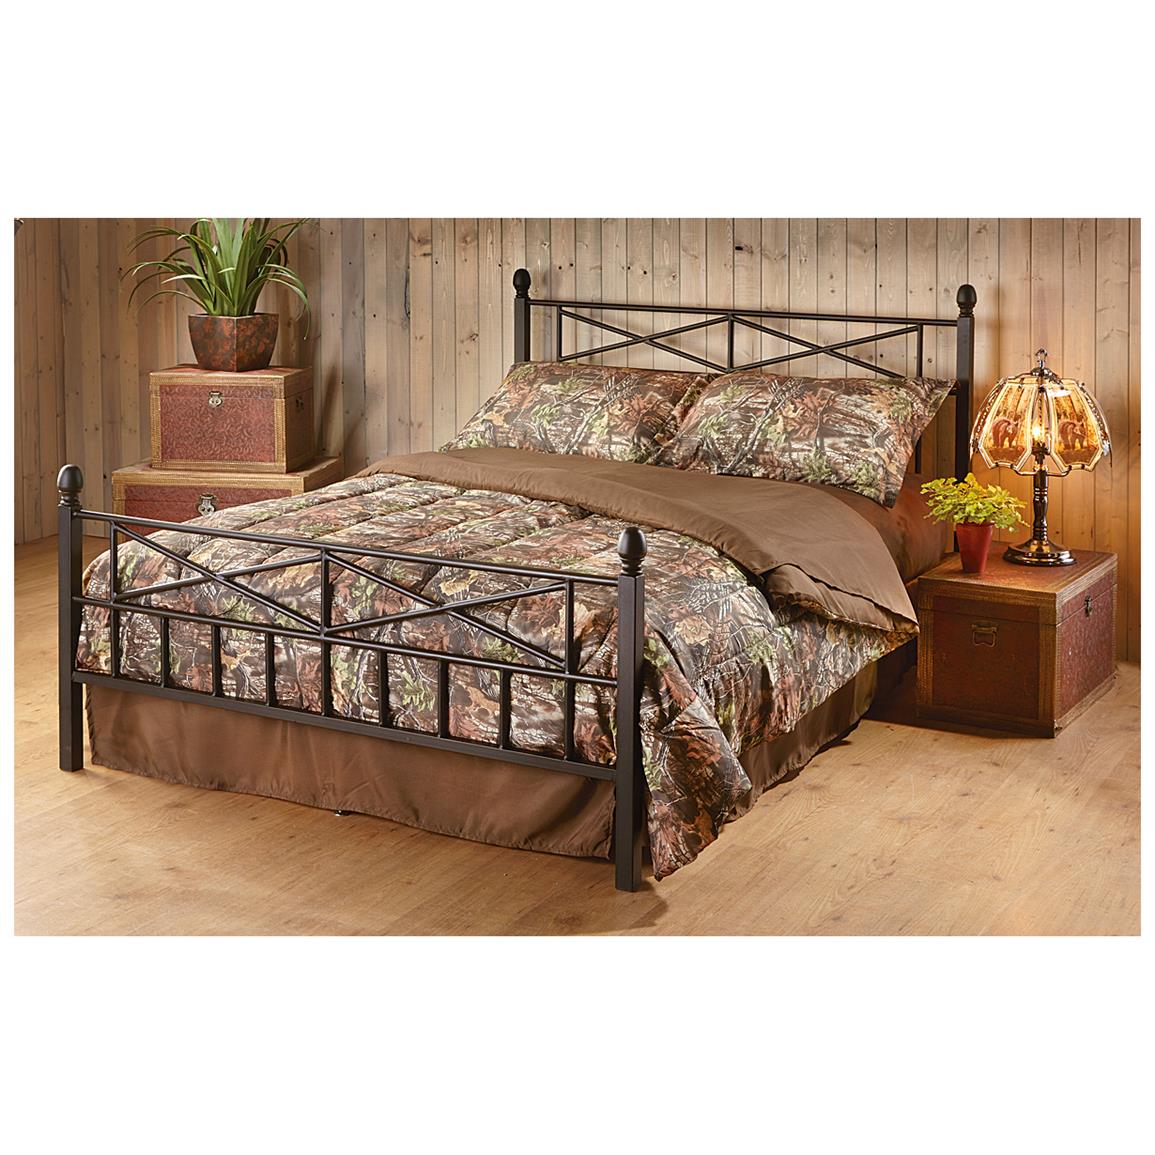 Tranquil Sleep Decorative Metal Bed Frame 633386 Mattresses And Frames